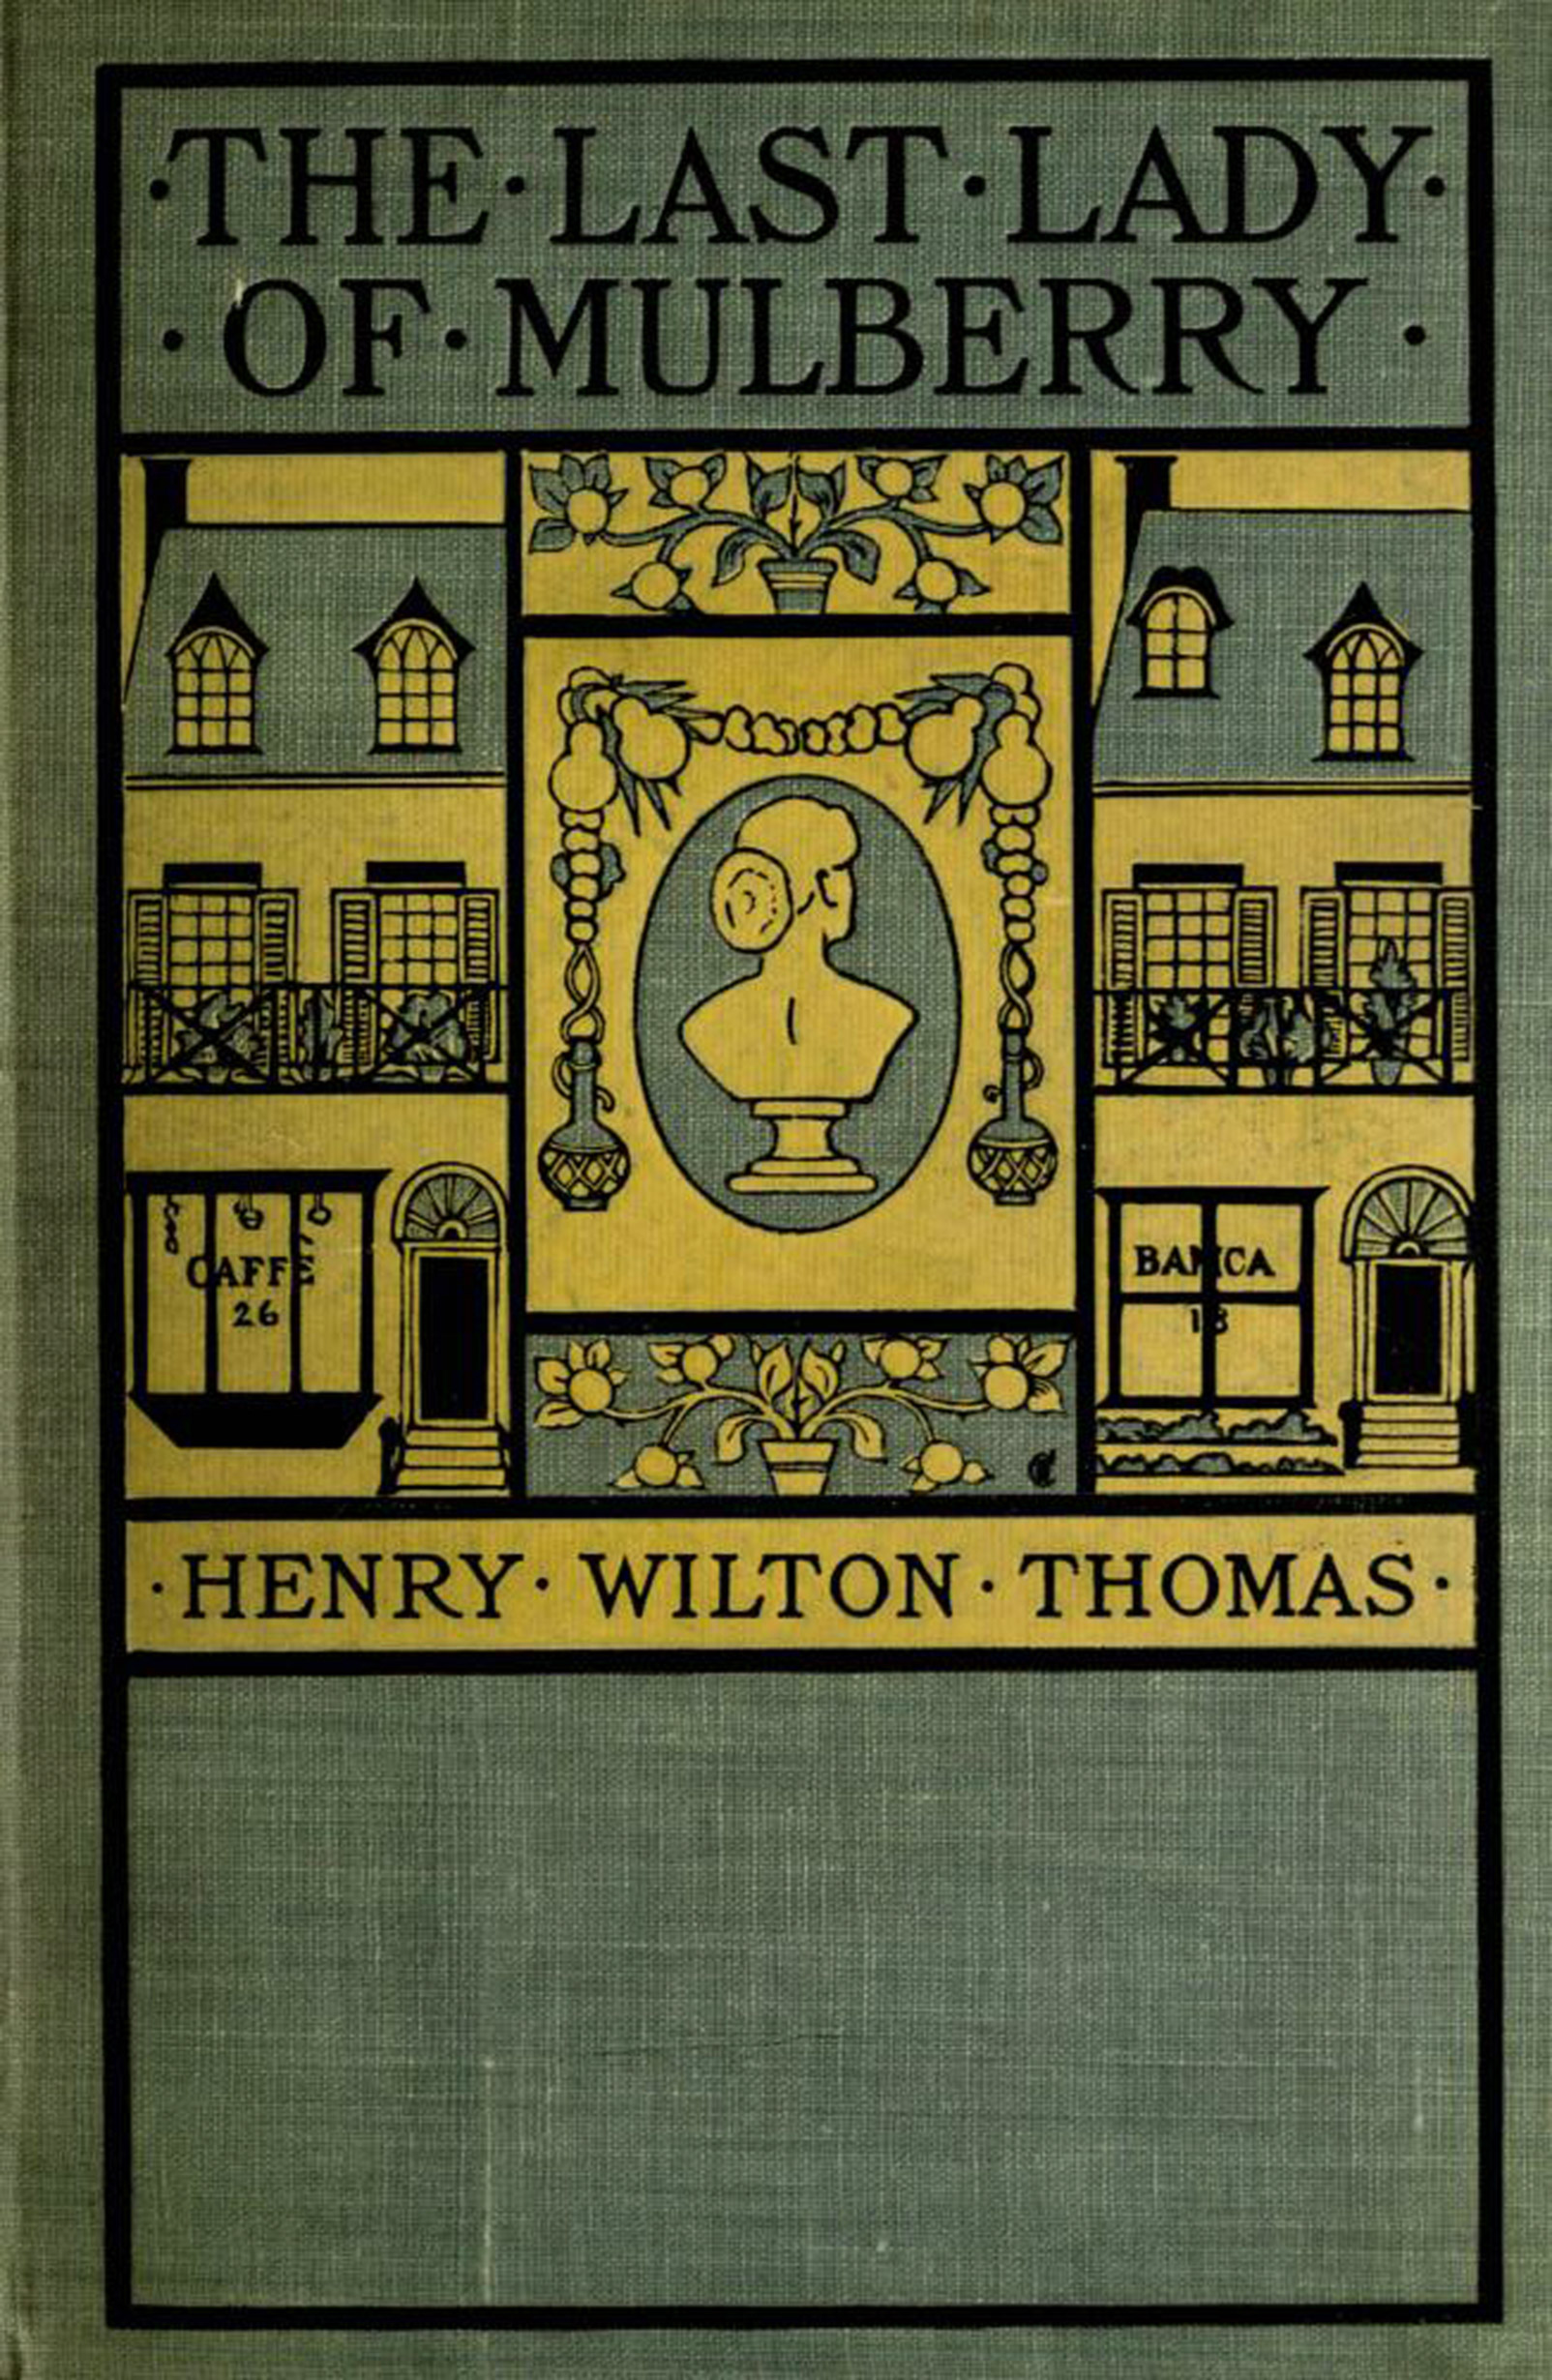 the Last Lady of Mulberry, by Henry Wilton Thomas—A Project Gutenberg eBook image